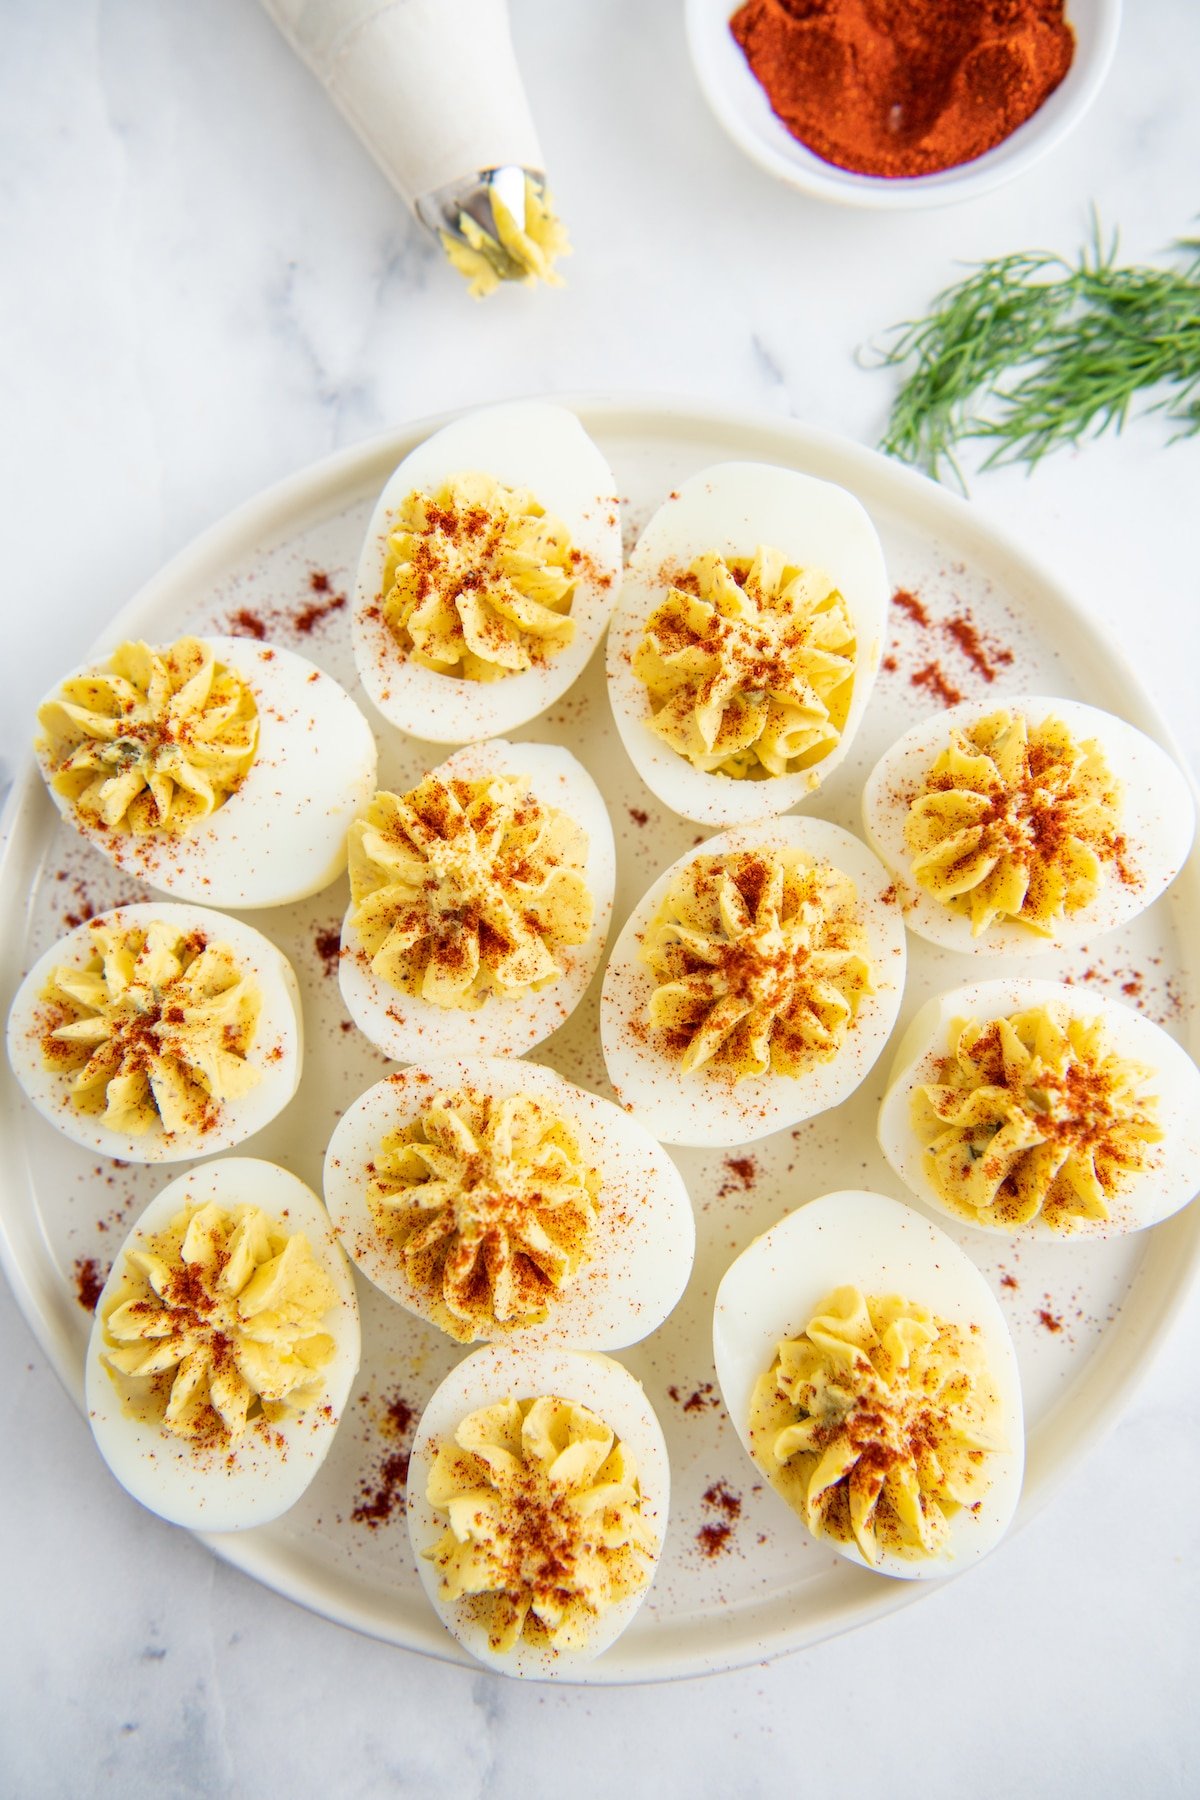 Deviled eggs on a white plate with paprika sprinkled on top.